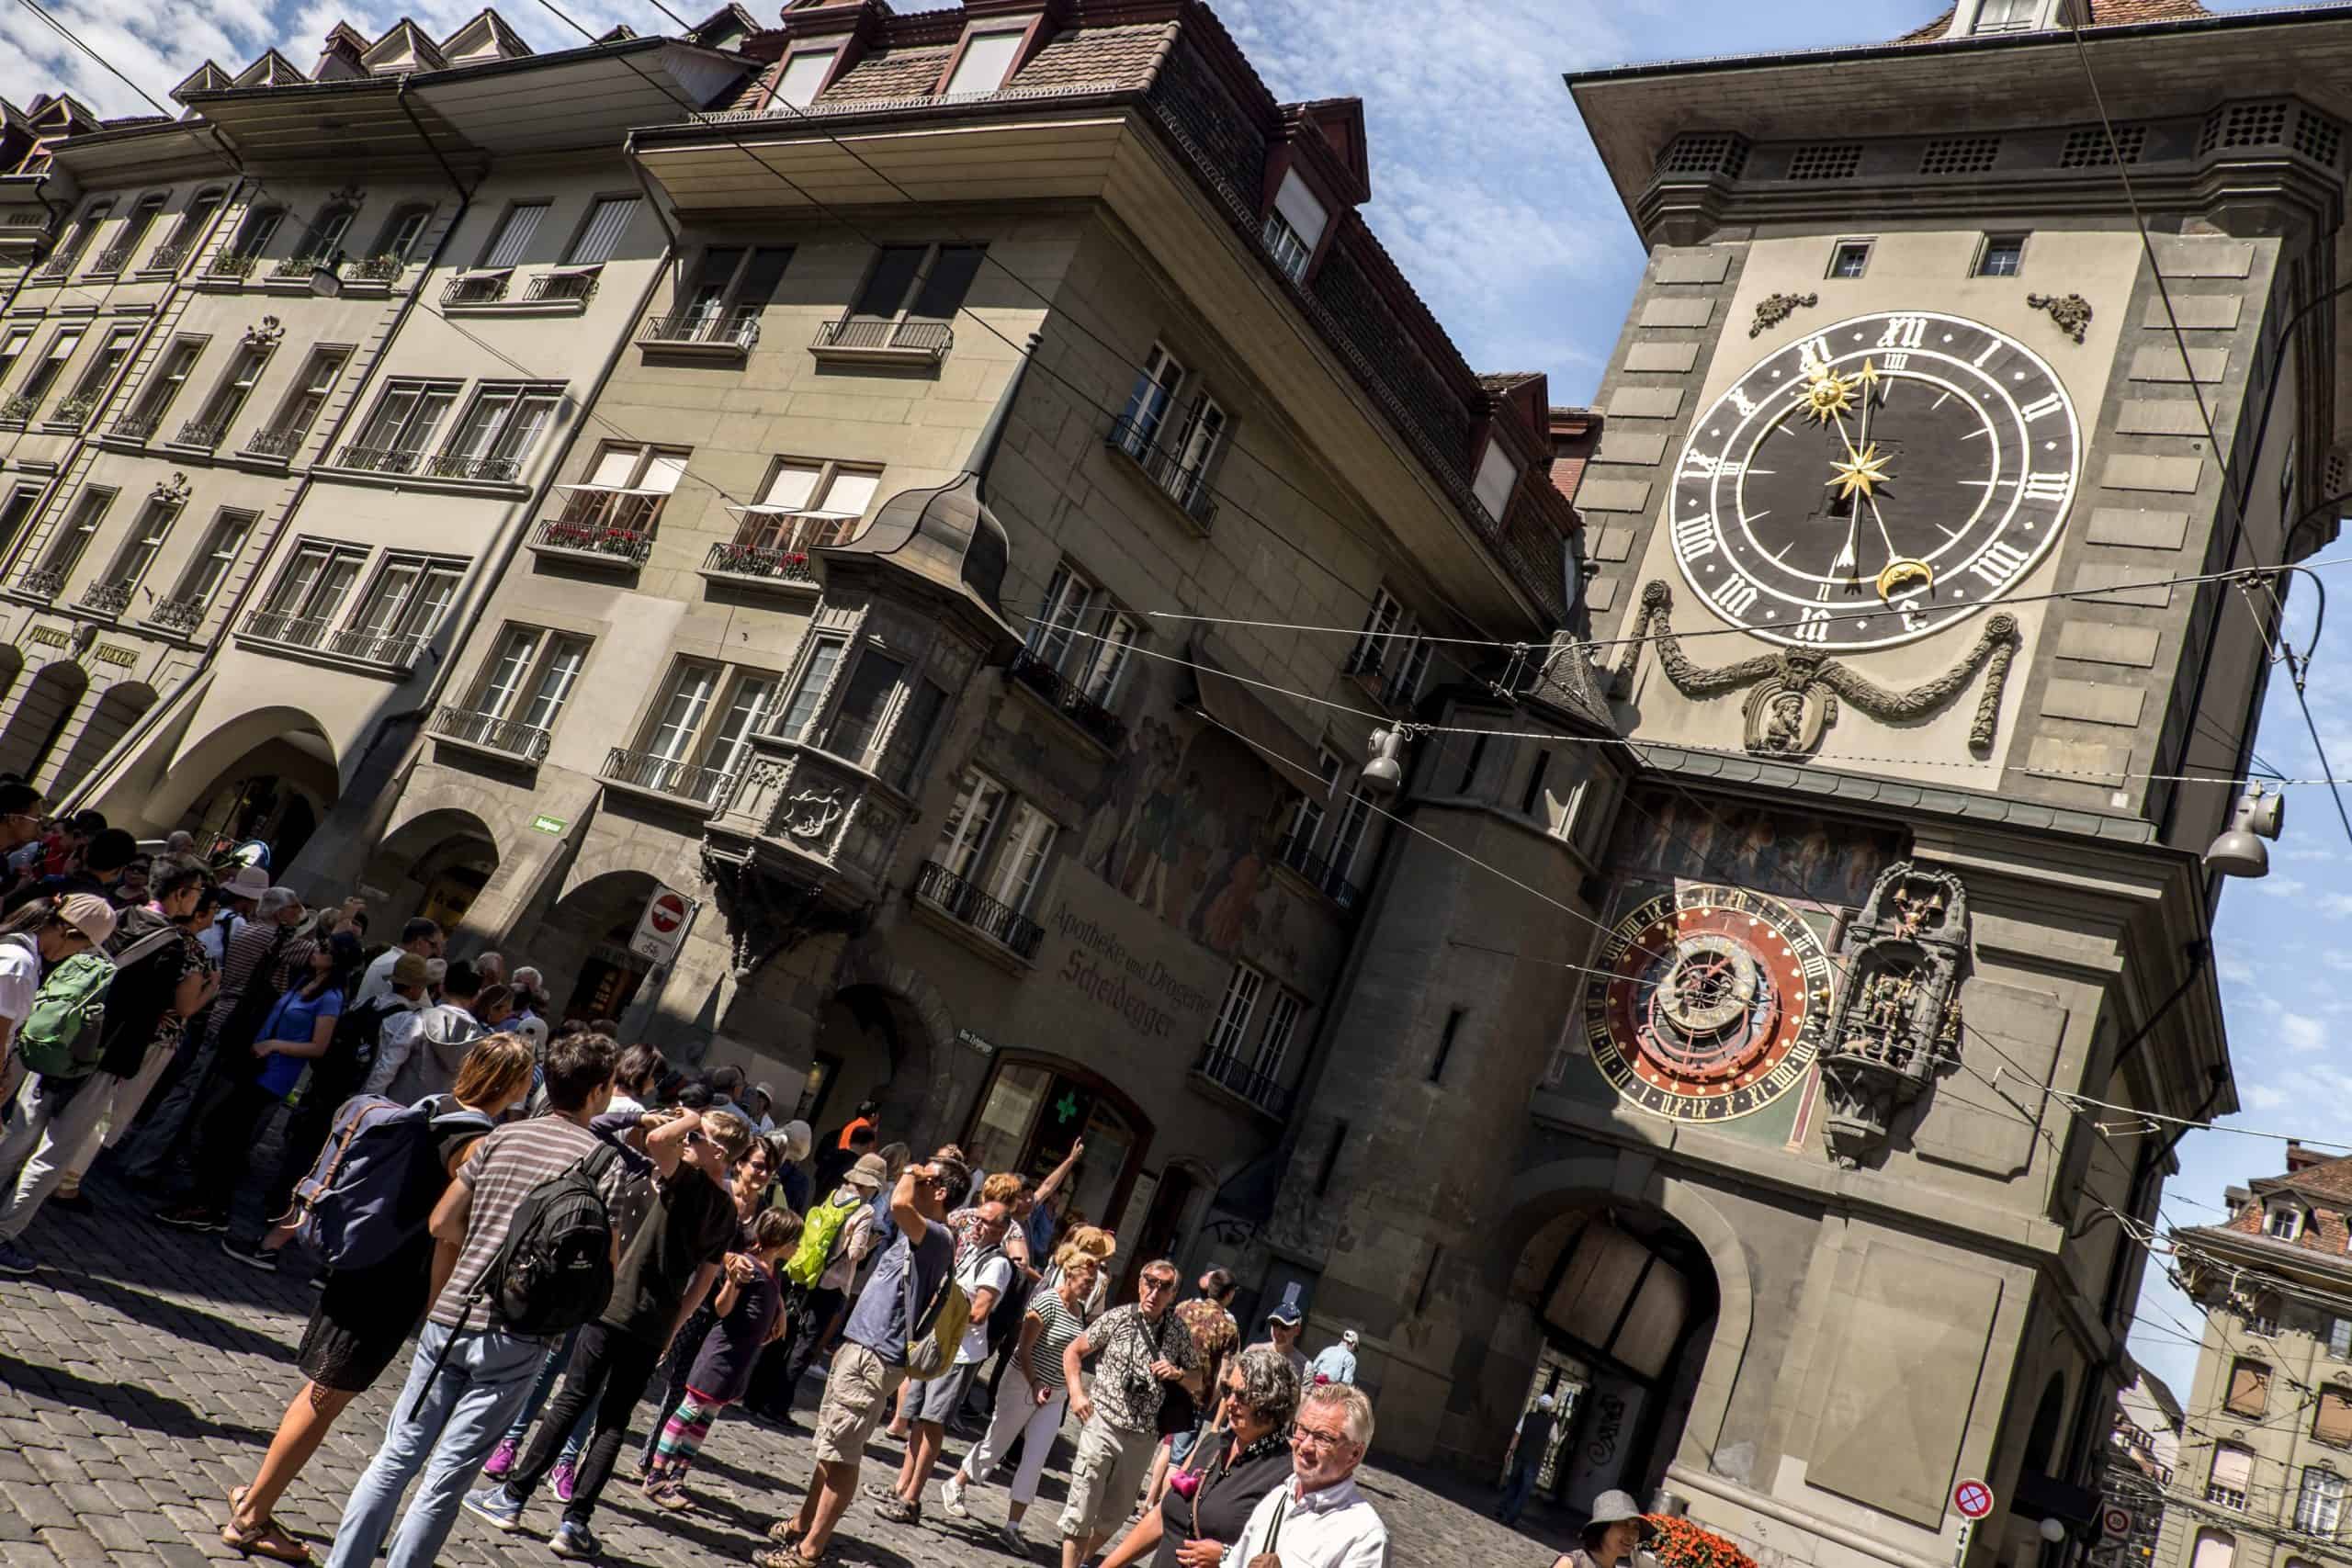 A small group of tourists outside the Zytglogge Clock Tower in Bern, Switzerland